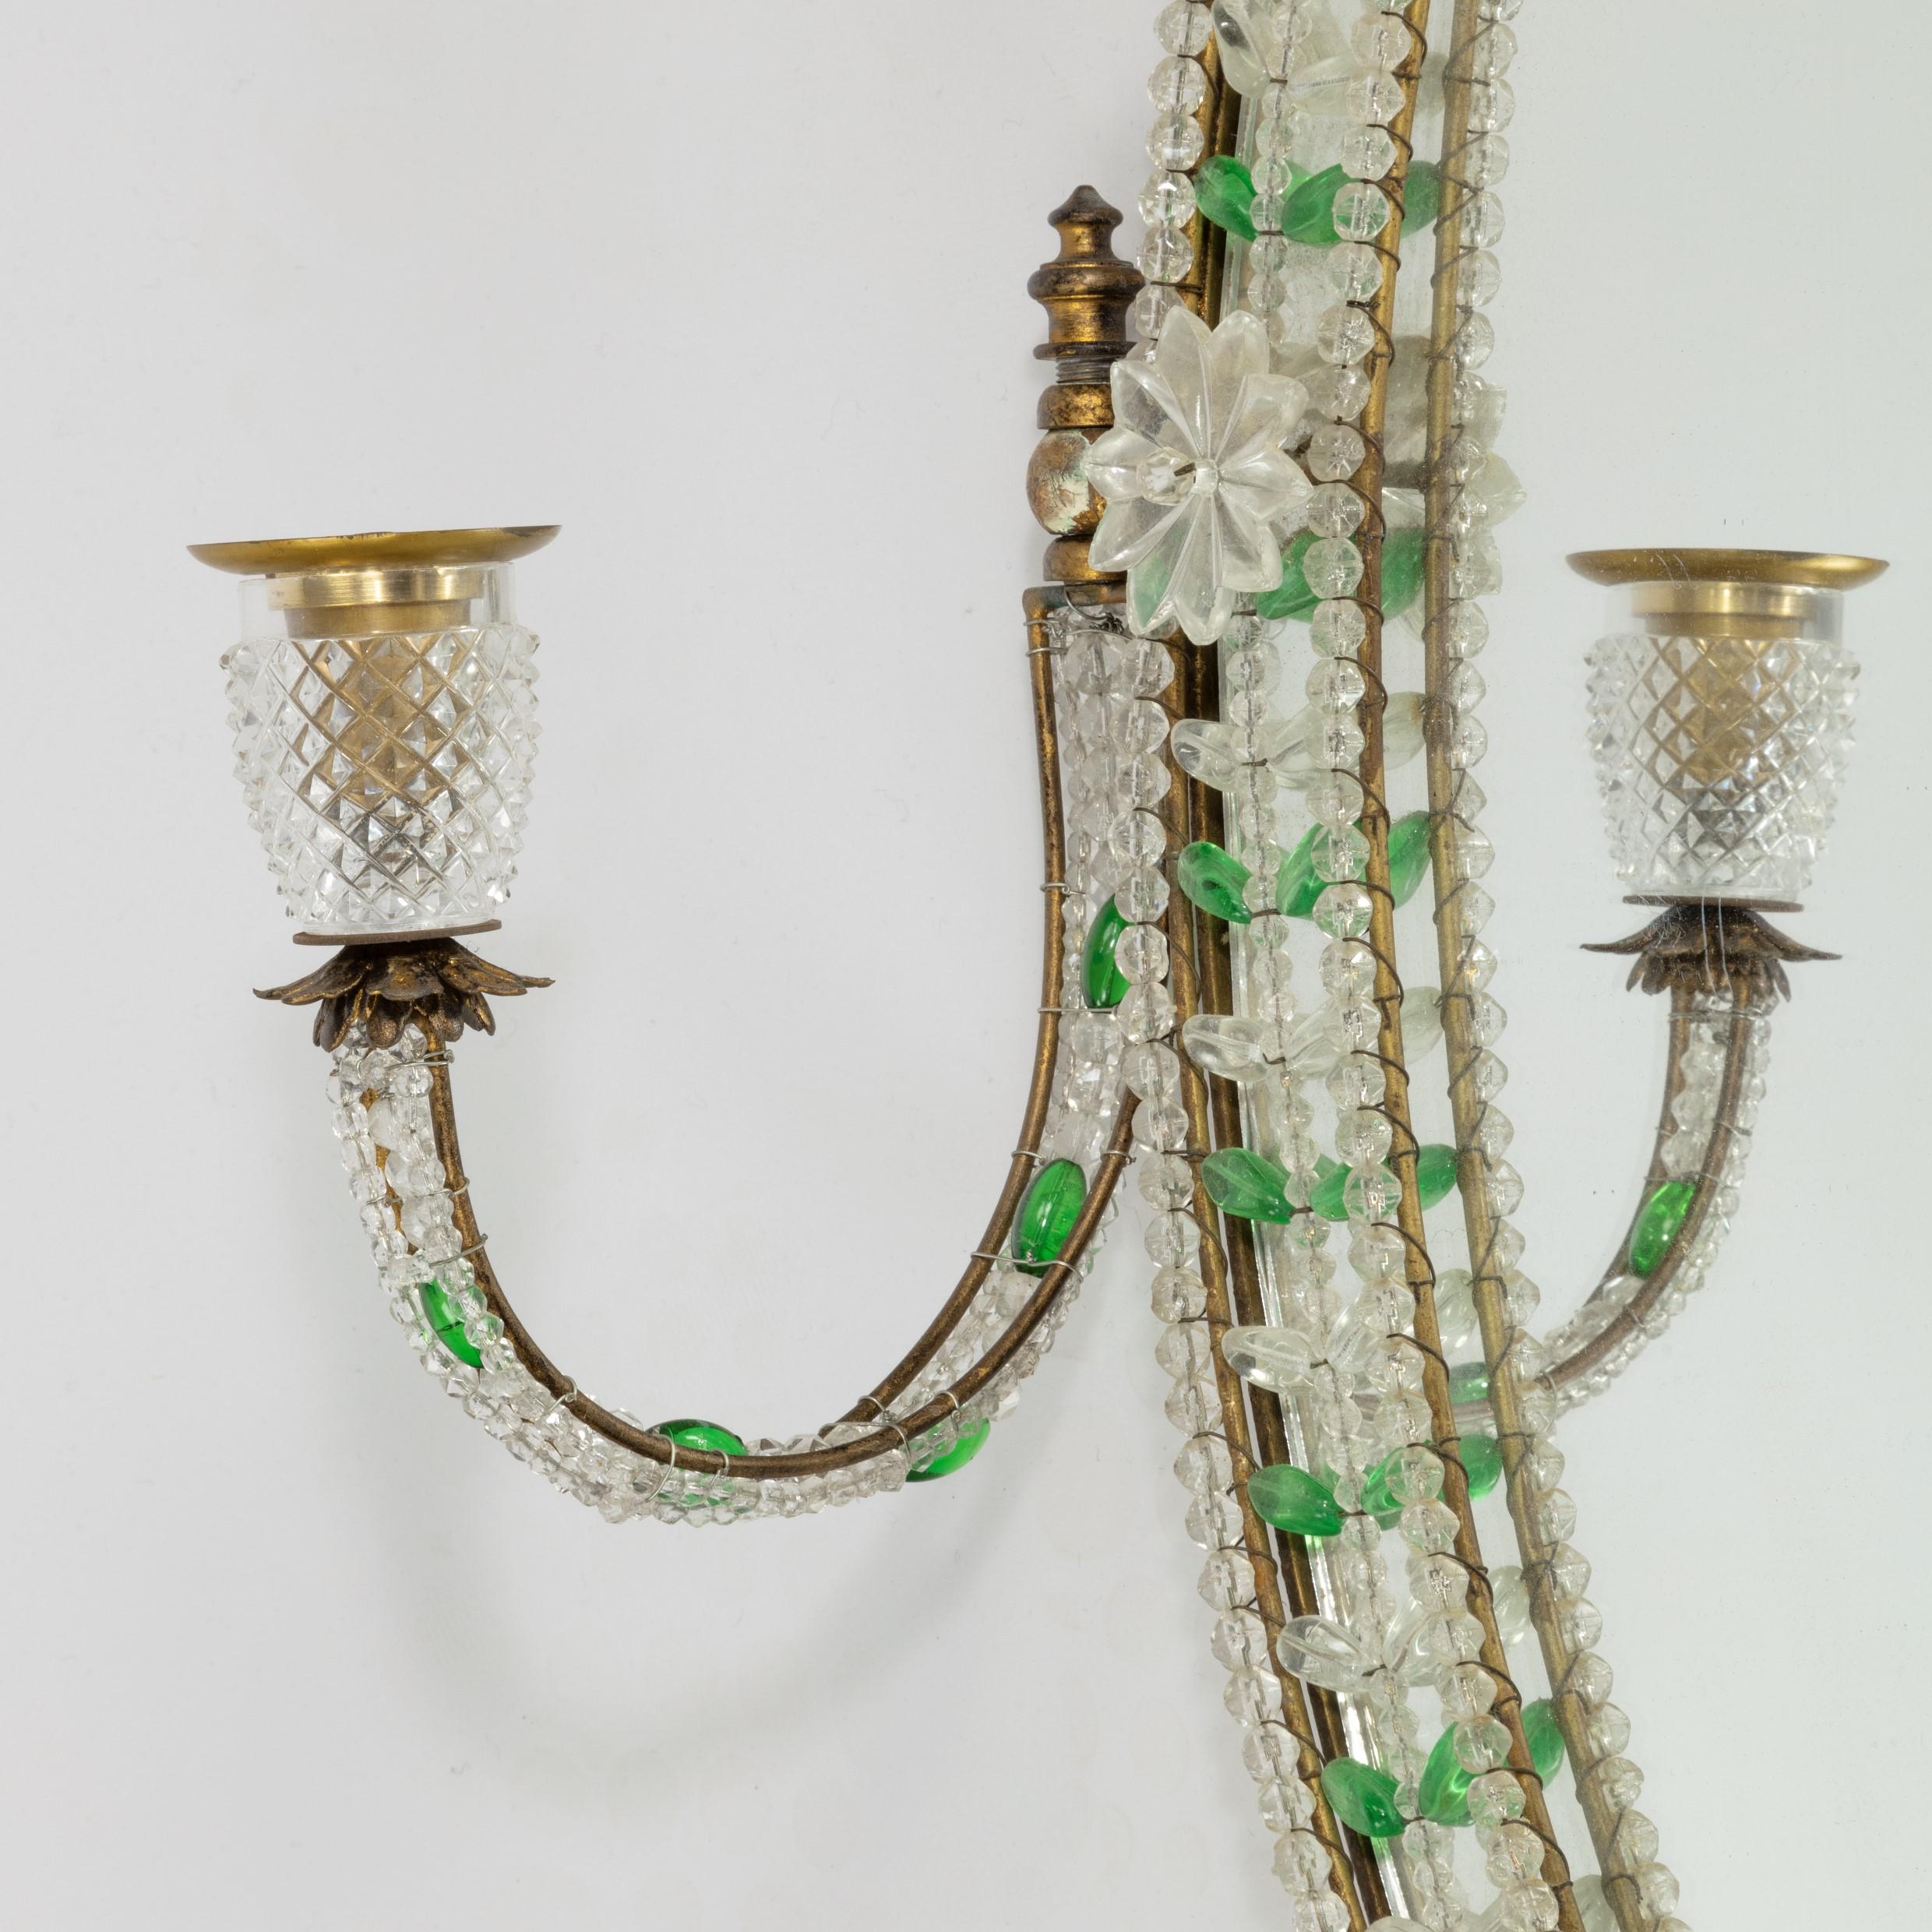 An early 20th century glass mirror, the oval plate within an ormolu frame bearing two adjustable candle arms, decorated with wire-strung clear and green glass beads and applied cut glass flower heads and sconces, English, circa 1920.
 